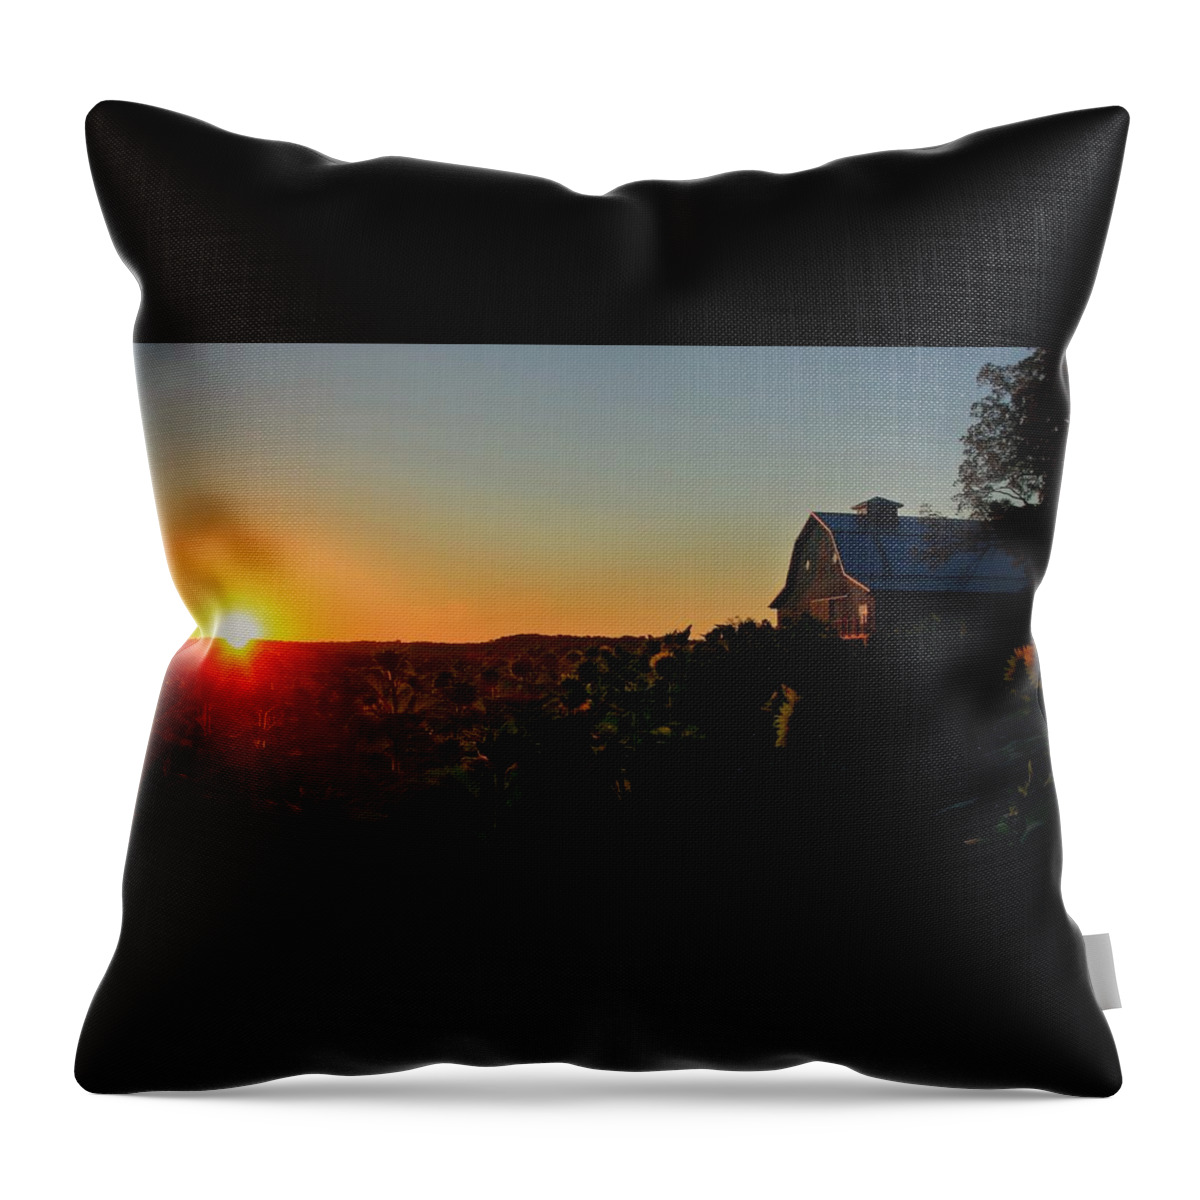 Sunrise Throw Pillow featuring the photograph Sunrise on the Farm by Chris Berry